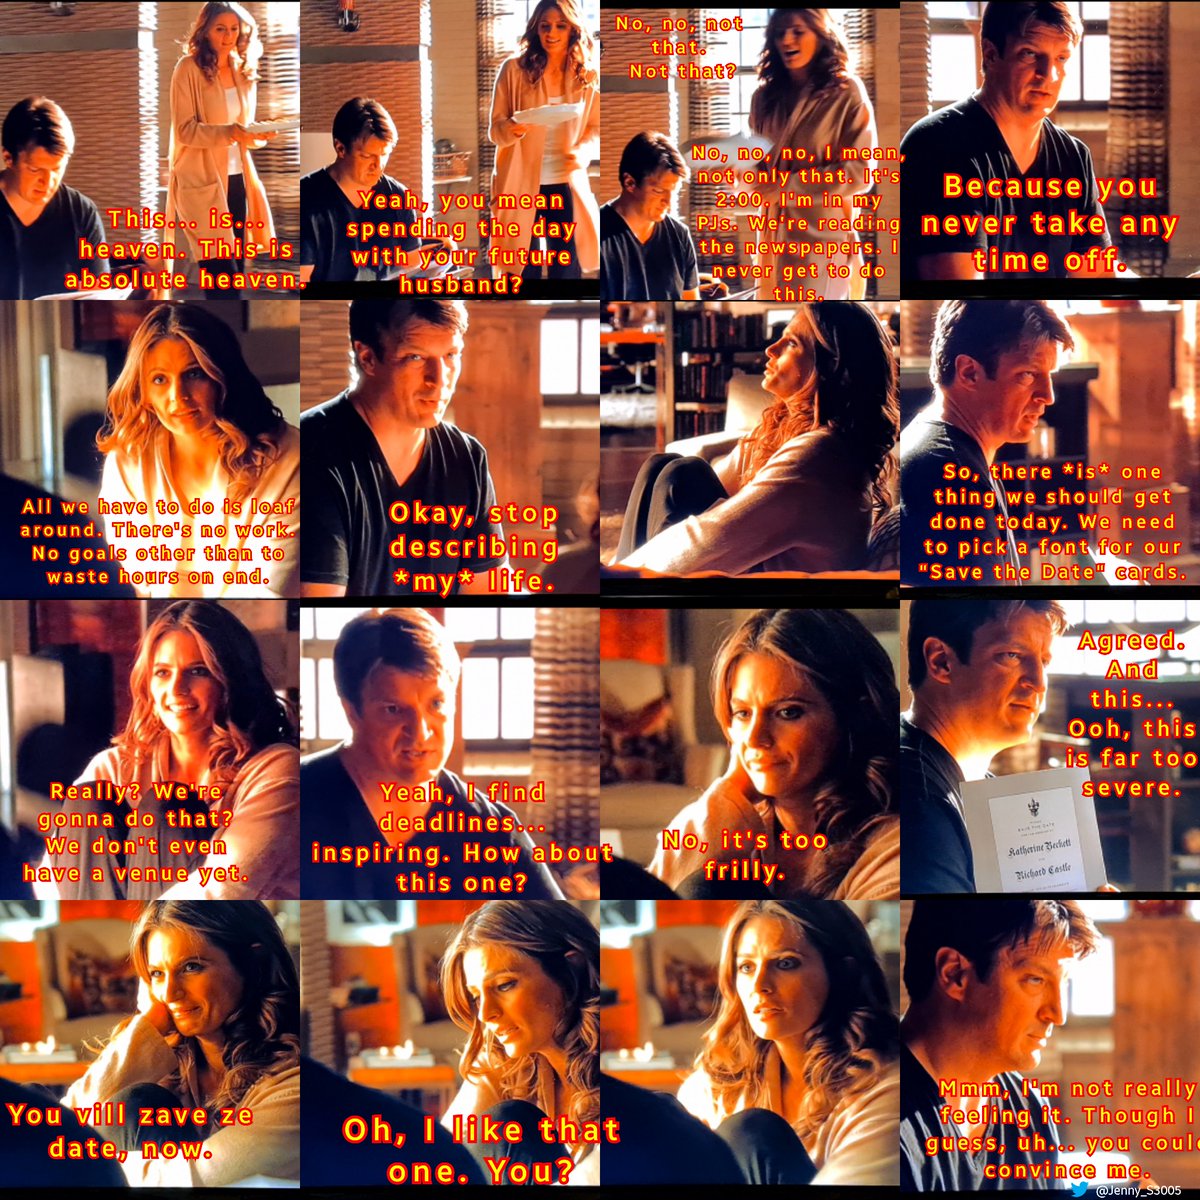 No #Castle aired on 08/12/xx-but a Memory-6x17- IN THE BELLY OF THE BEAST (I/III)

C:Yeah,u mean spending the day with ur future husband?
KB:No,no,not that.
C:Not that?
KB:No,no,no, I mean,not only that. It's 2. I'm in my PJs. We're reading the newspapers. I never get to do this. https://t.co/TmMcJdipxM